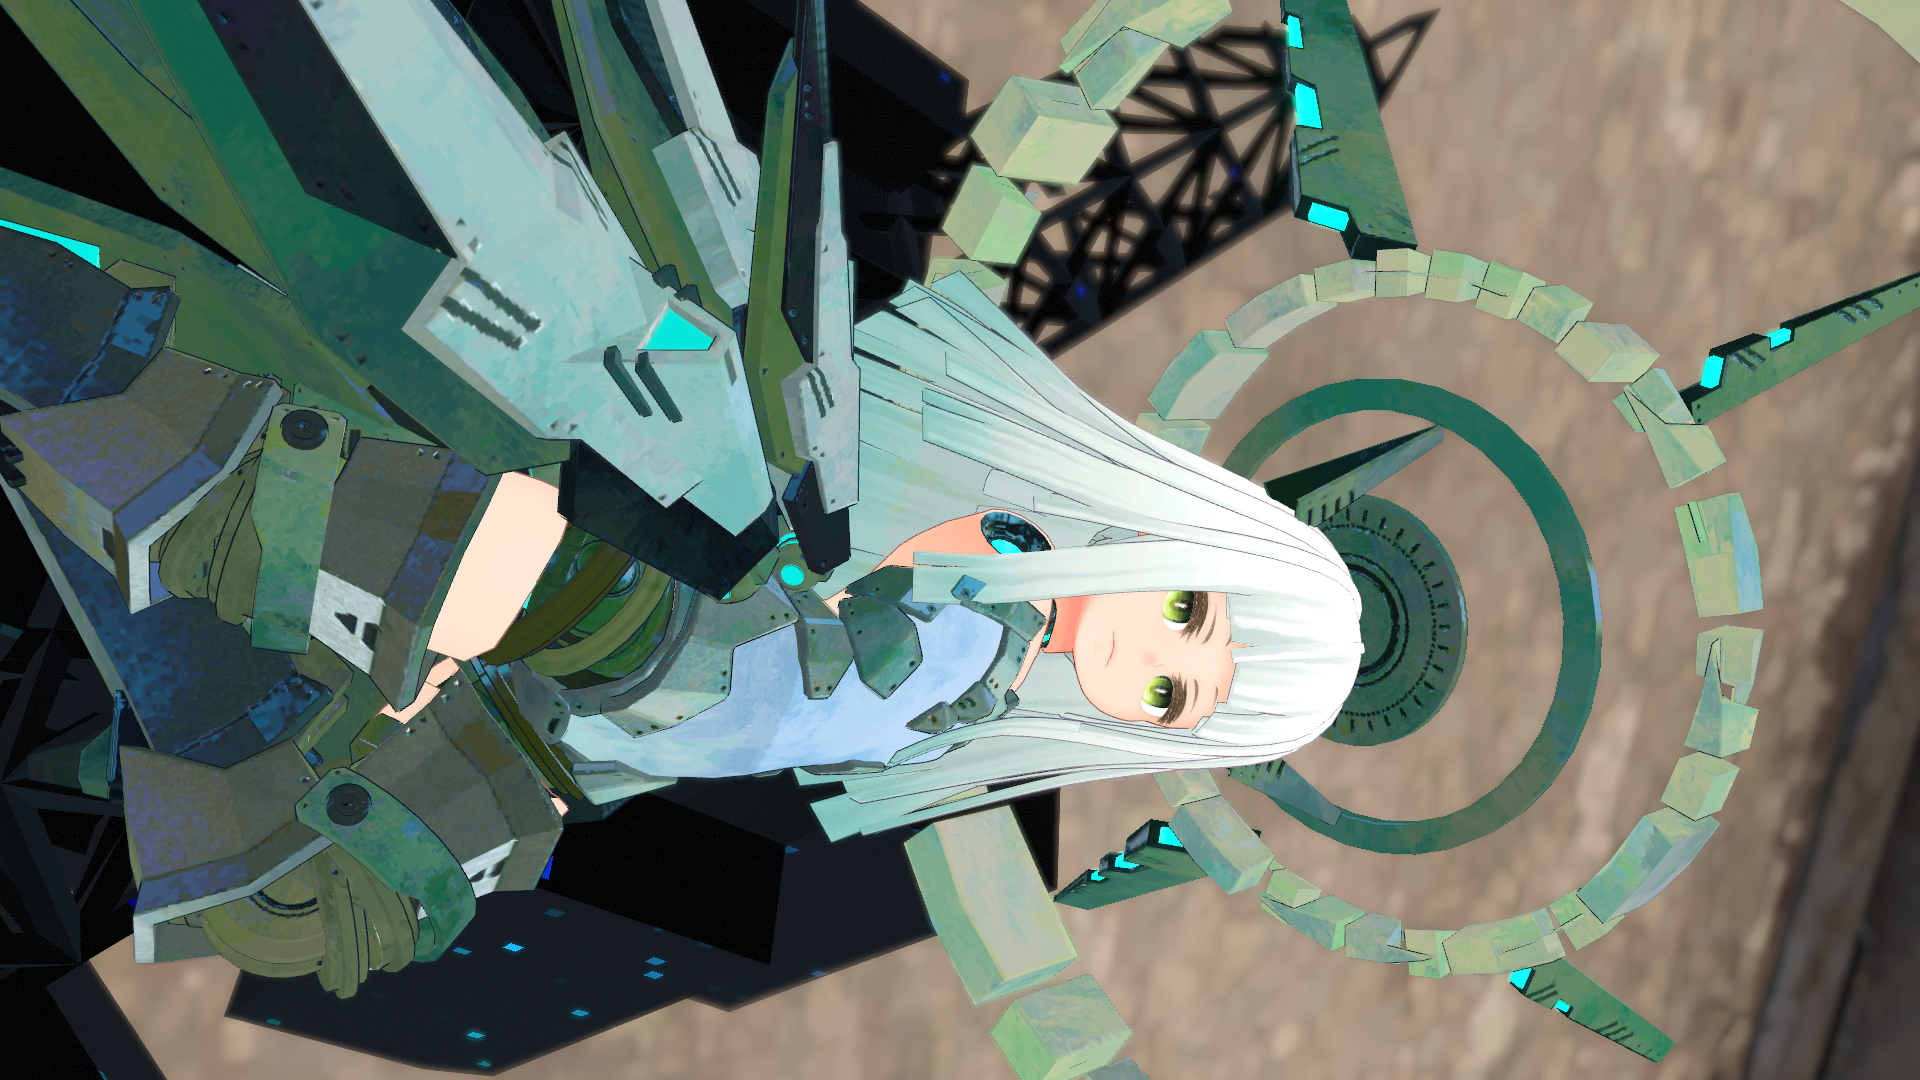 VRChat_1920x1080_2021-12-05_04-27-54.142.png